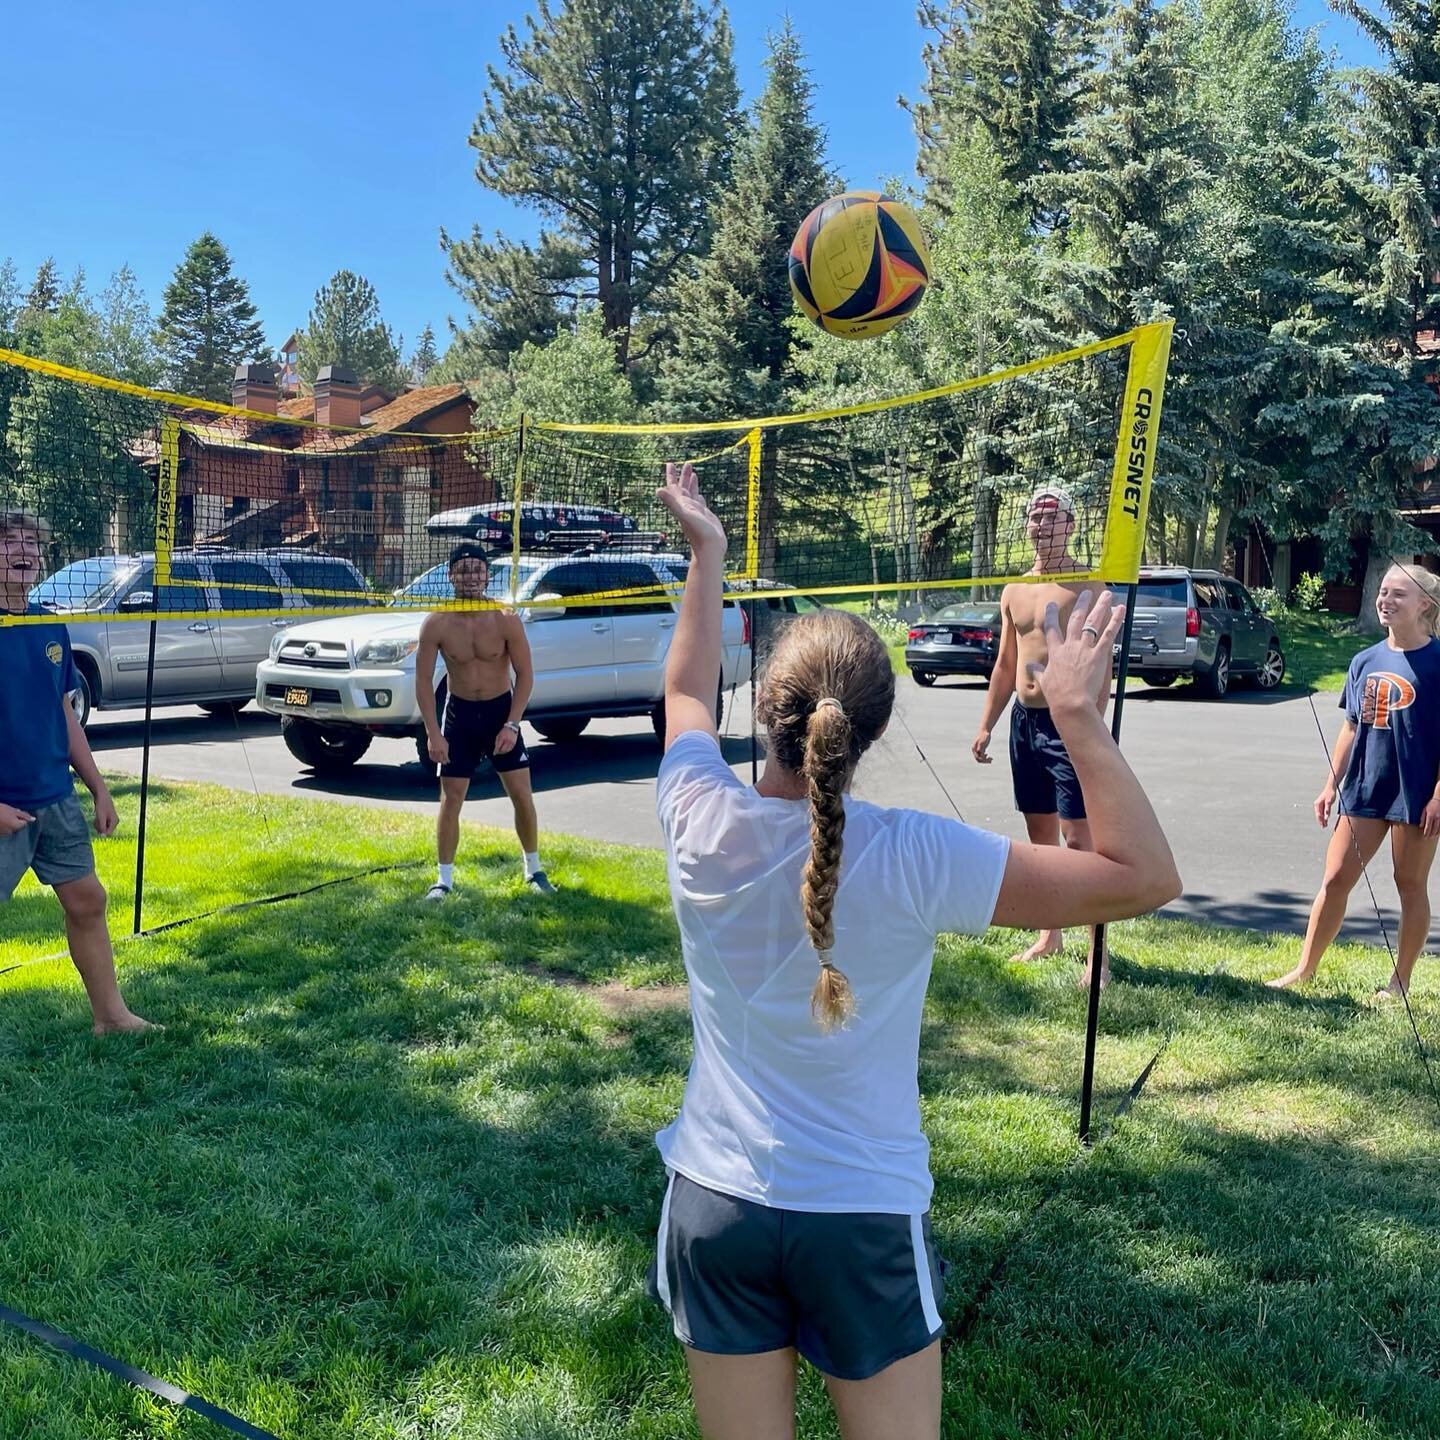 Crossnet. 

This Tuesday&rsquo;s tip: find an outdoor activity to do with others. If you have fitness goals, finding a buddy to hold you accountable and bring joy through community in the process 👍💪

Crossnet: four square meets volleyball. Rotate u